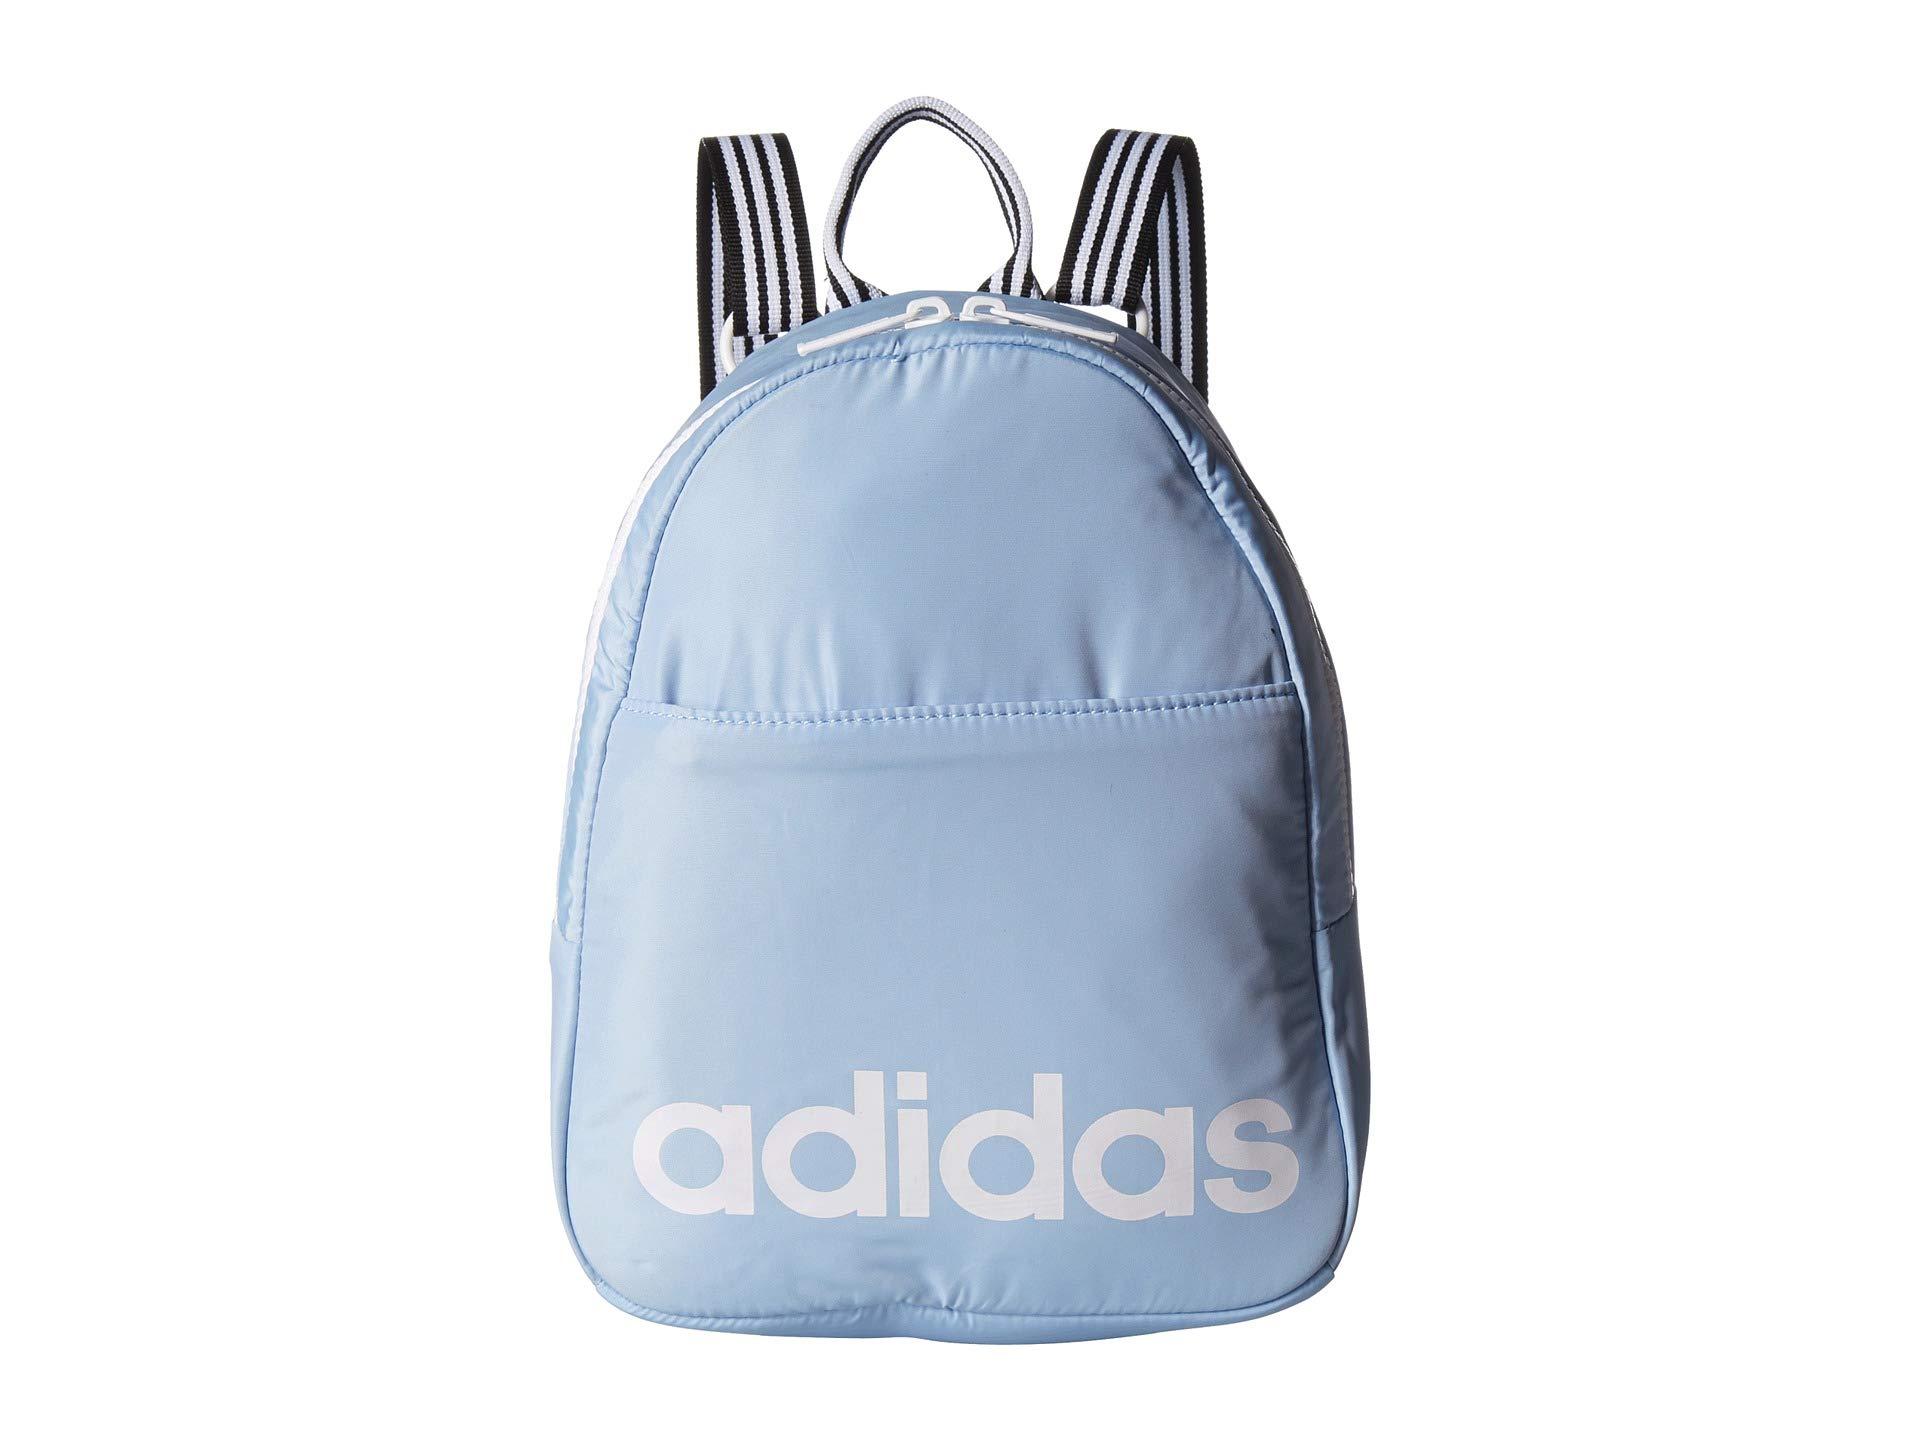 adidas Synthetic Core Mini Backpack in Blue - Lyst